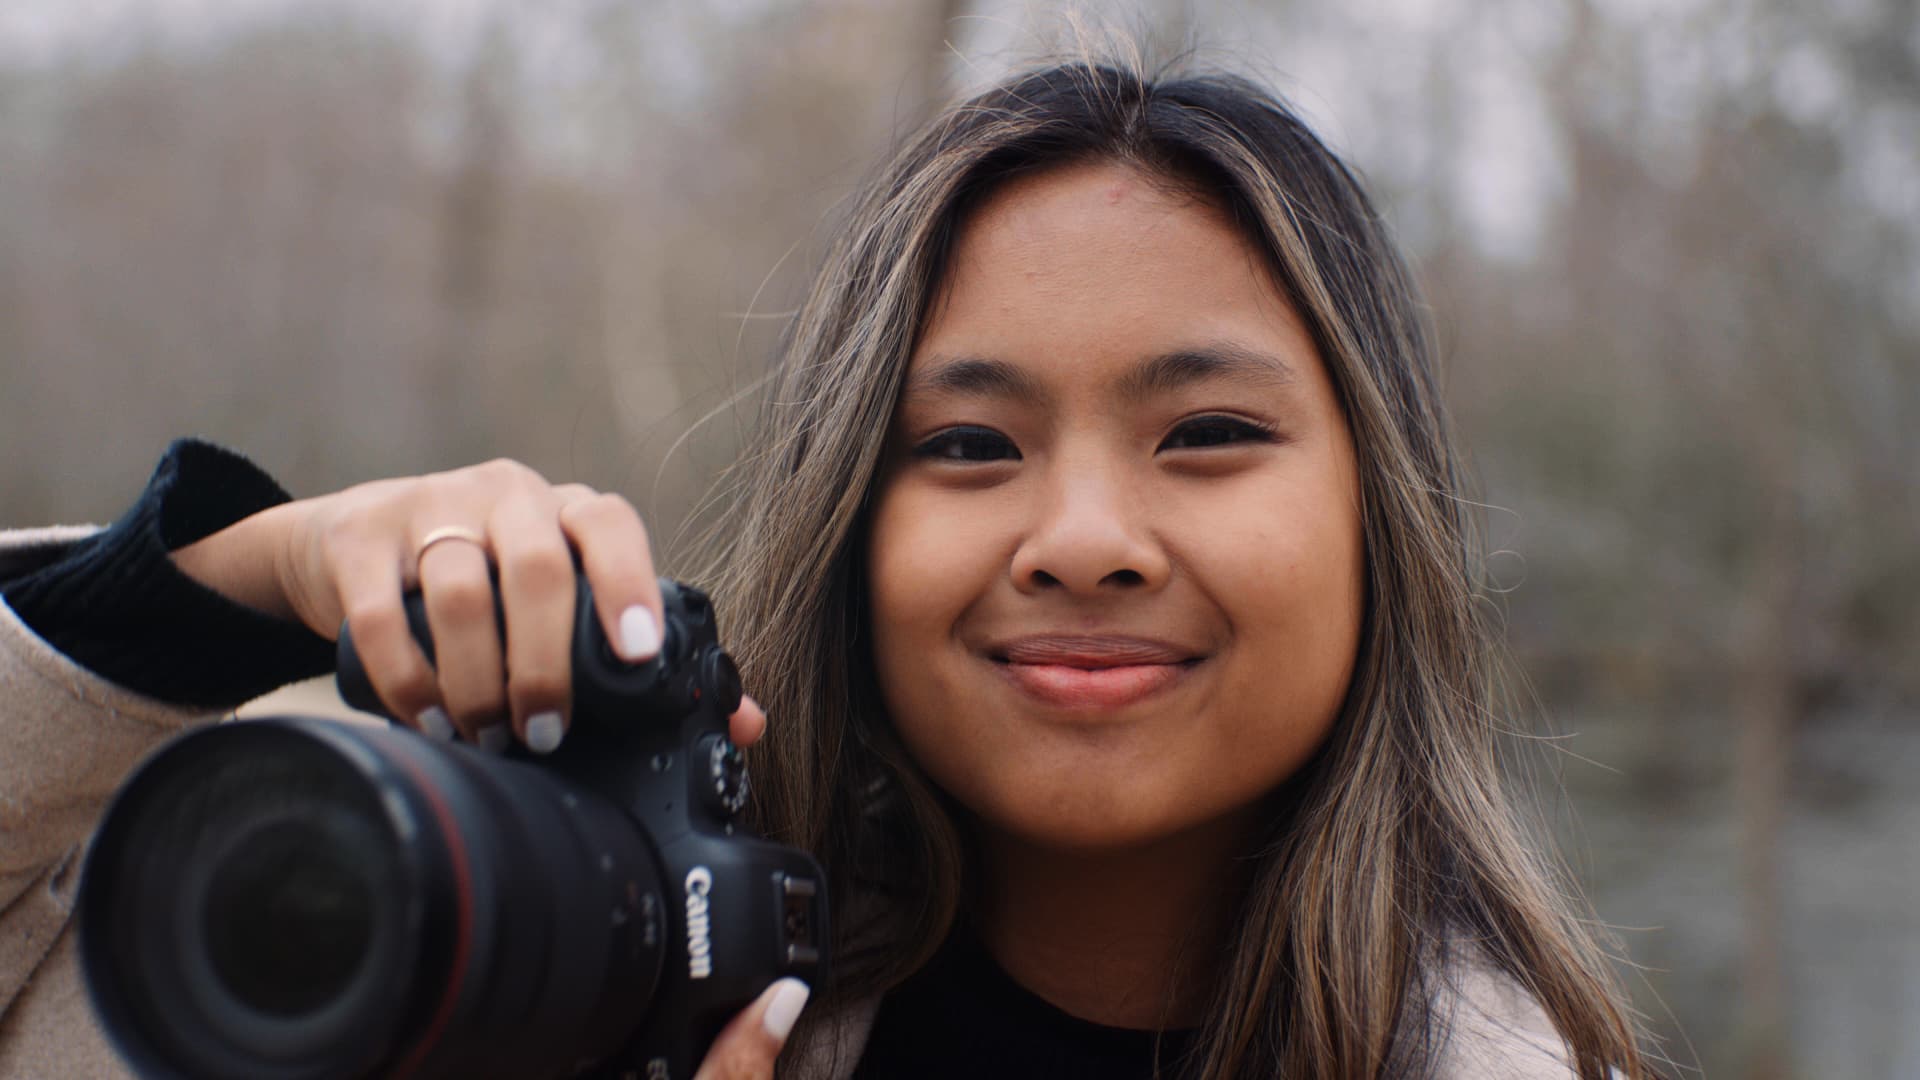 This 23-year-old spent $45,000 to become a wedding photographer—now she makes $177,000 per year - CNBC